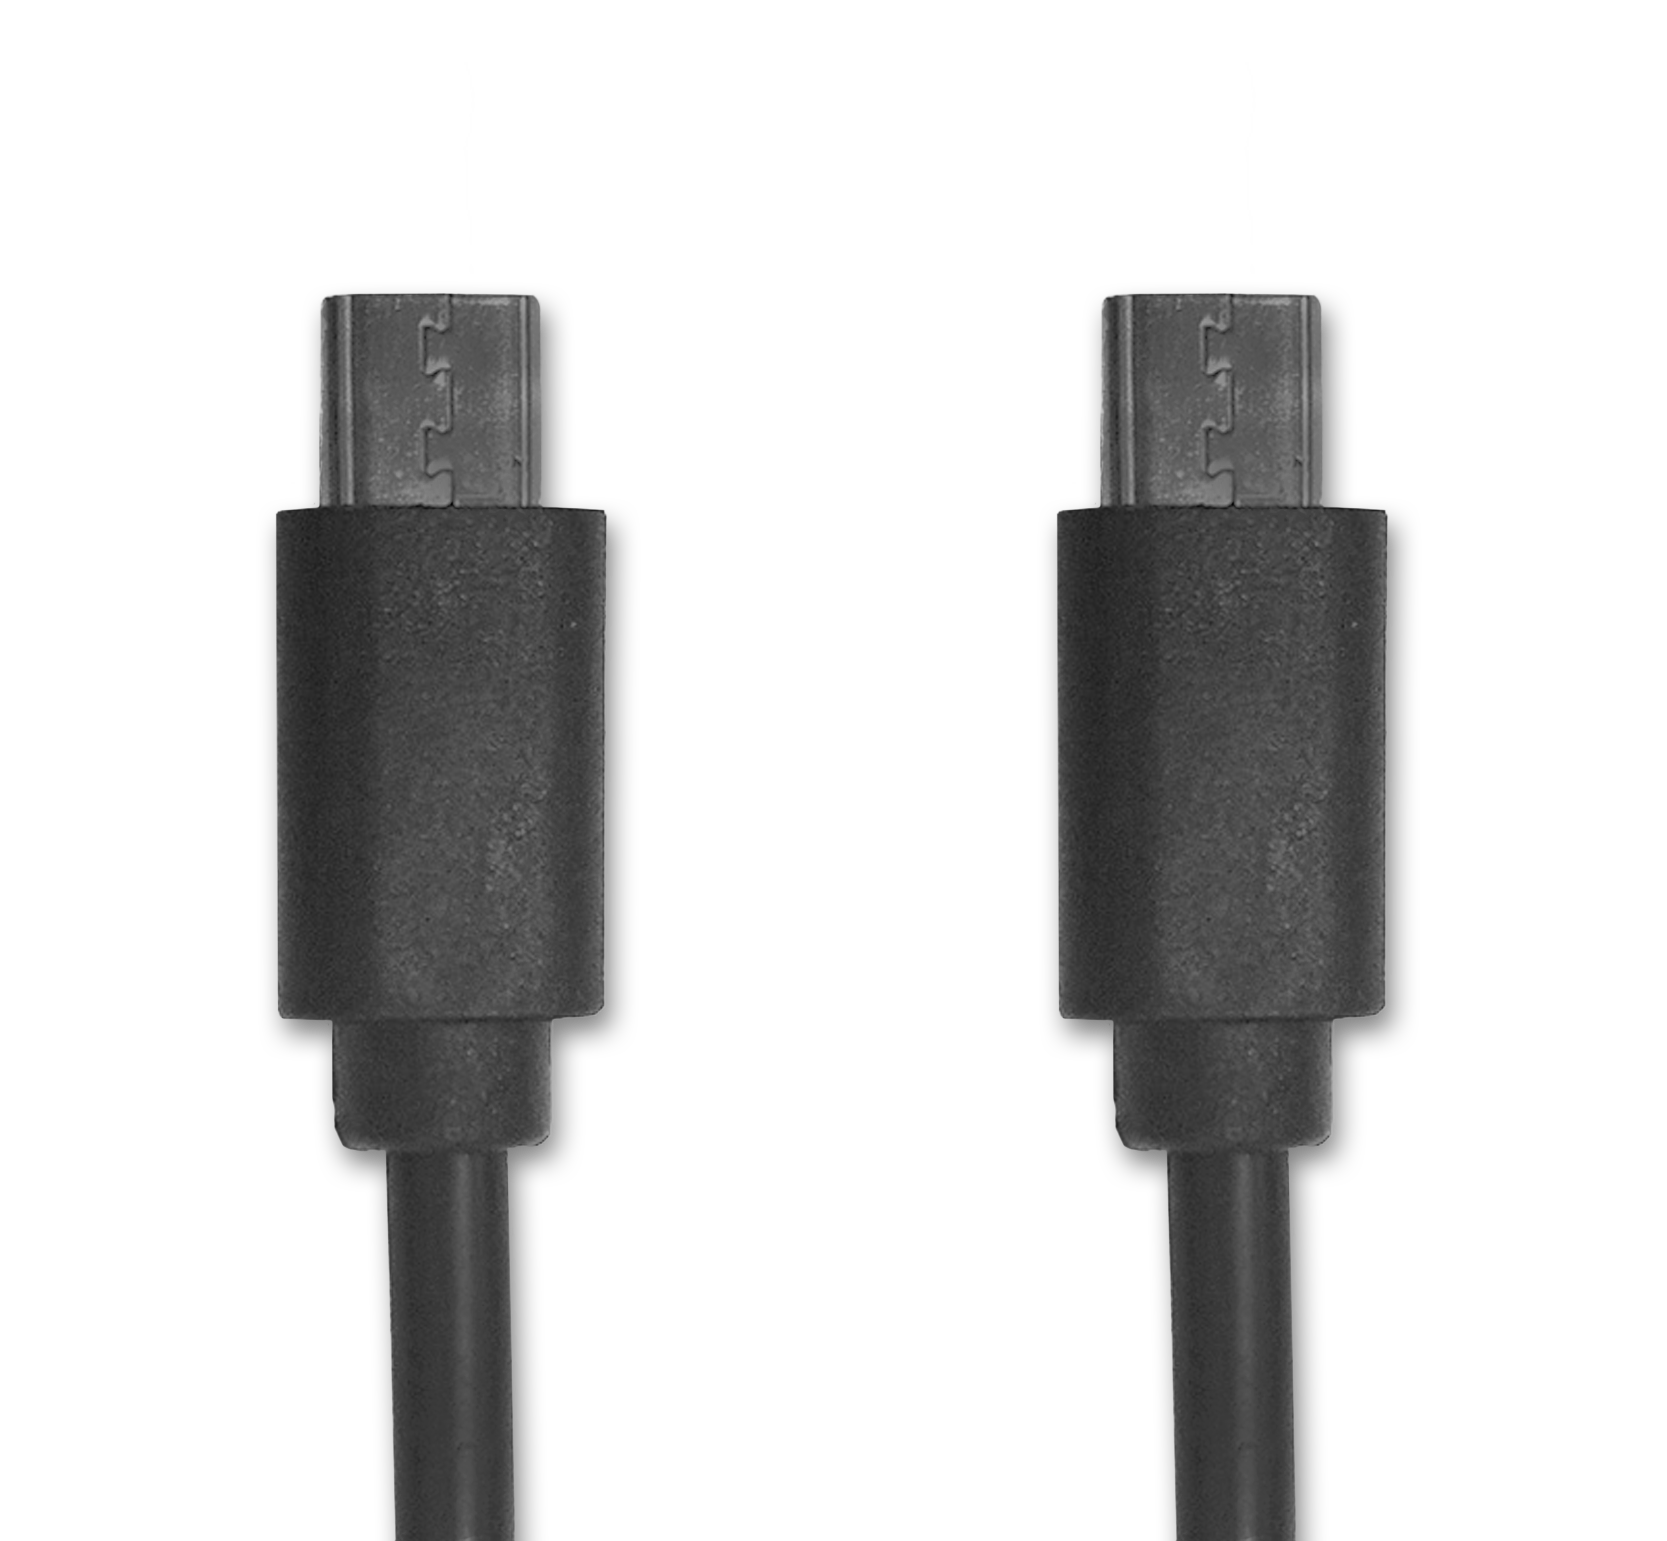 Straight/straight micro-USB-to-micro-USB male-to-male cable, ideal for LAVA's SimulCharge adapters